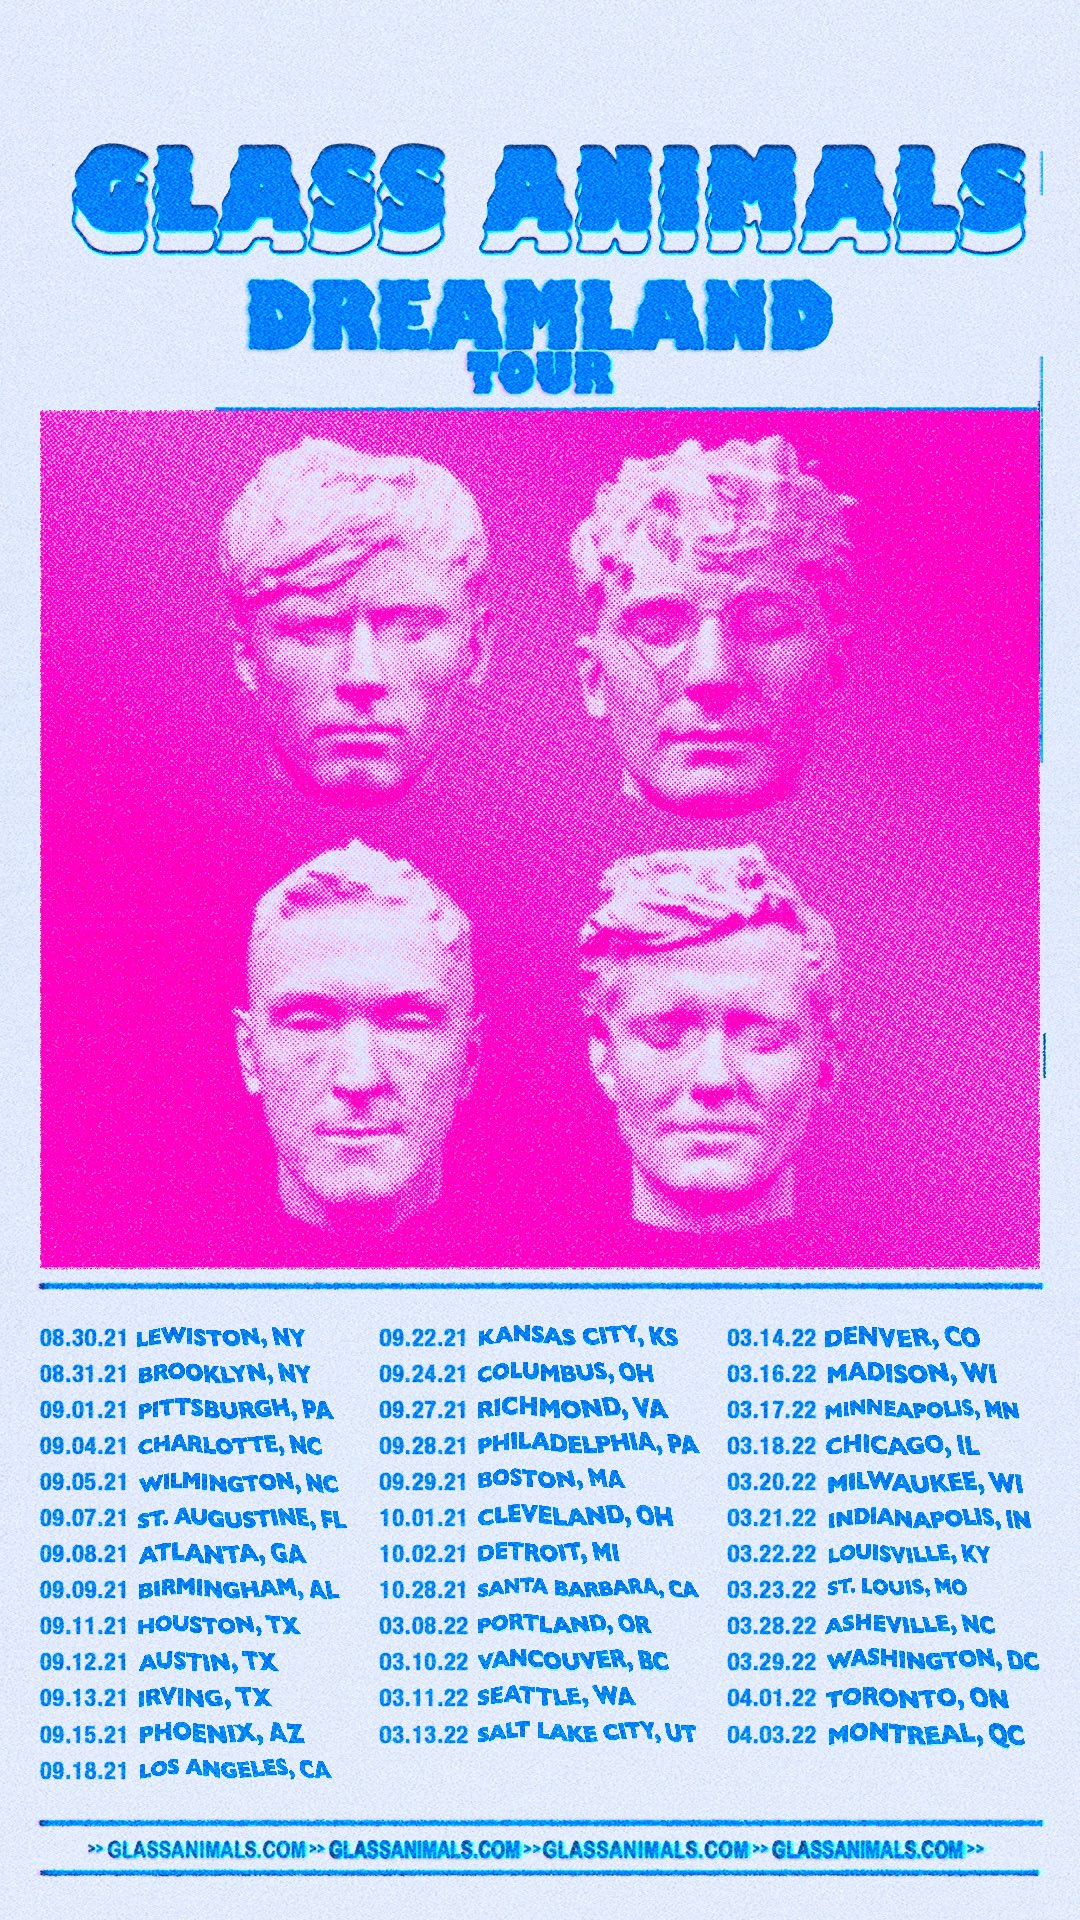 Dreamland Tour at Murat Theatre at Old National Centre (Indianapolis) on 21  Mar 2022 | Last.fm